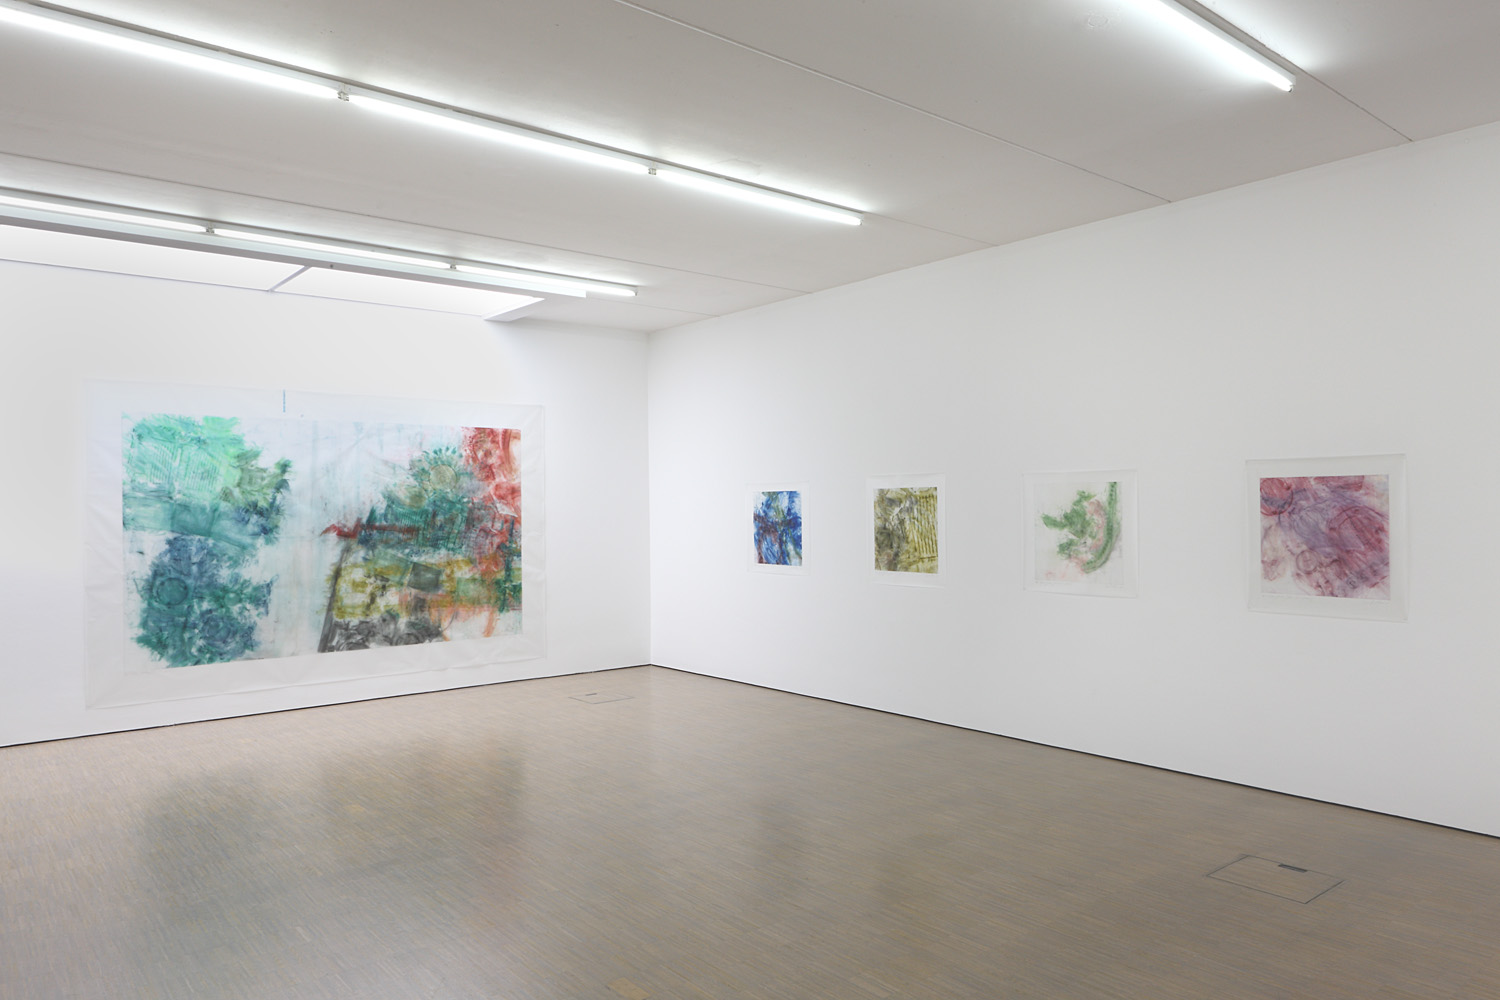 "Drawings from the Shtiftung Zollverein," Galerie Anke Schmidt, Cologne, Germany